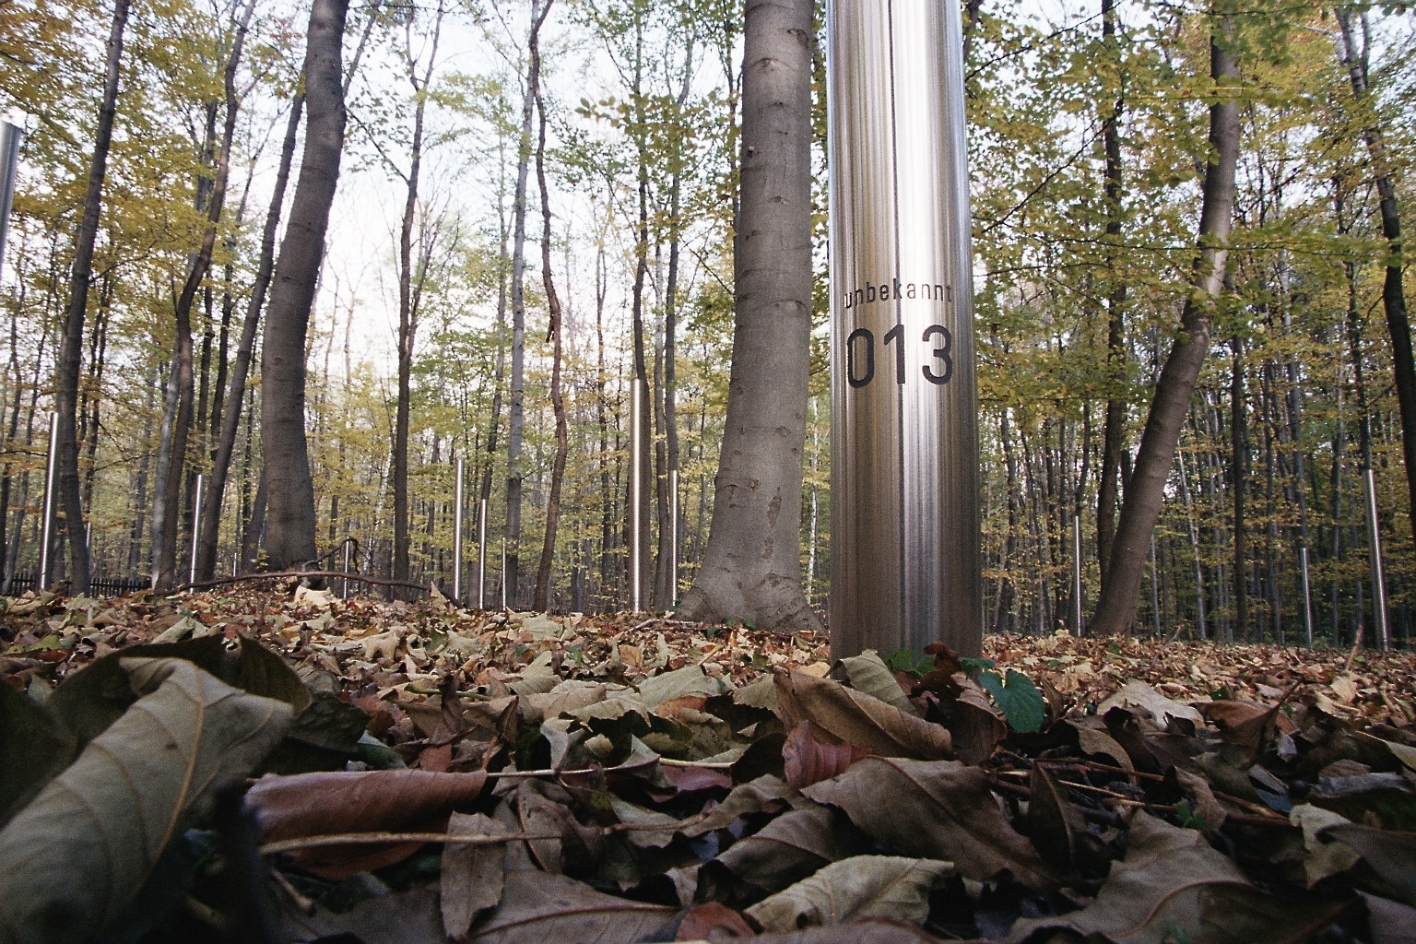 A single steel stele amidst the forest. At the bottom of the stele the number 13 and the word "Unknown". In the background more stelae throughout the forest